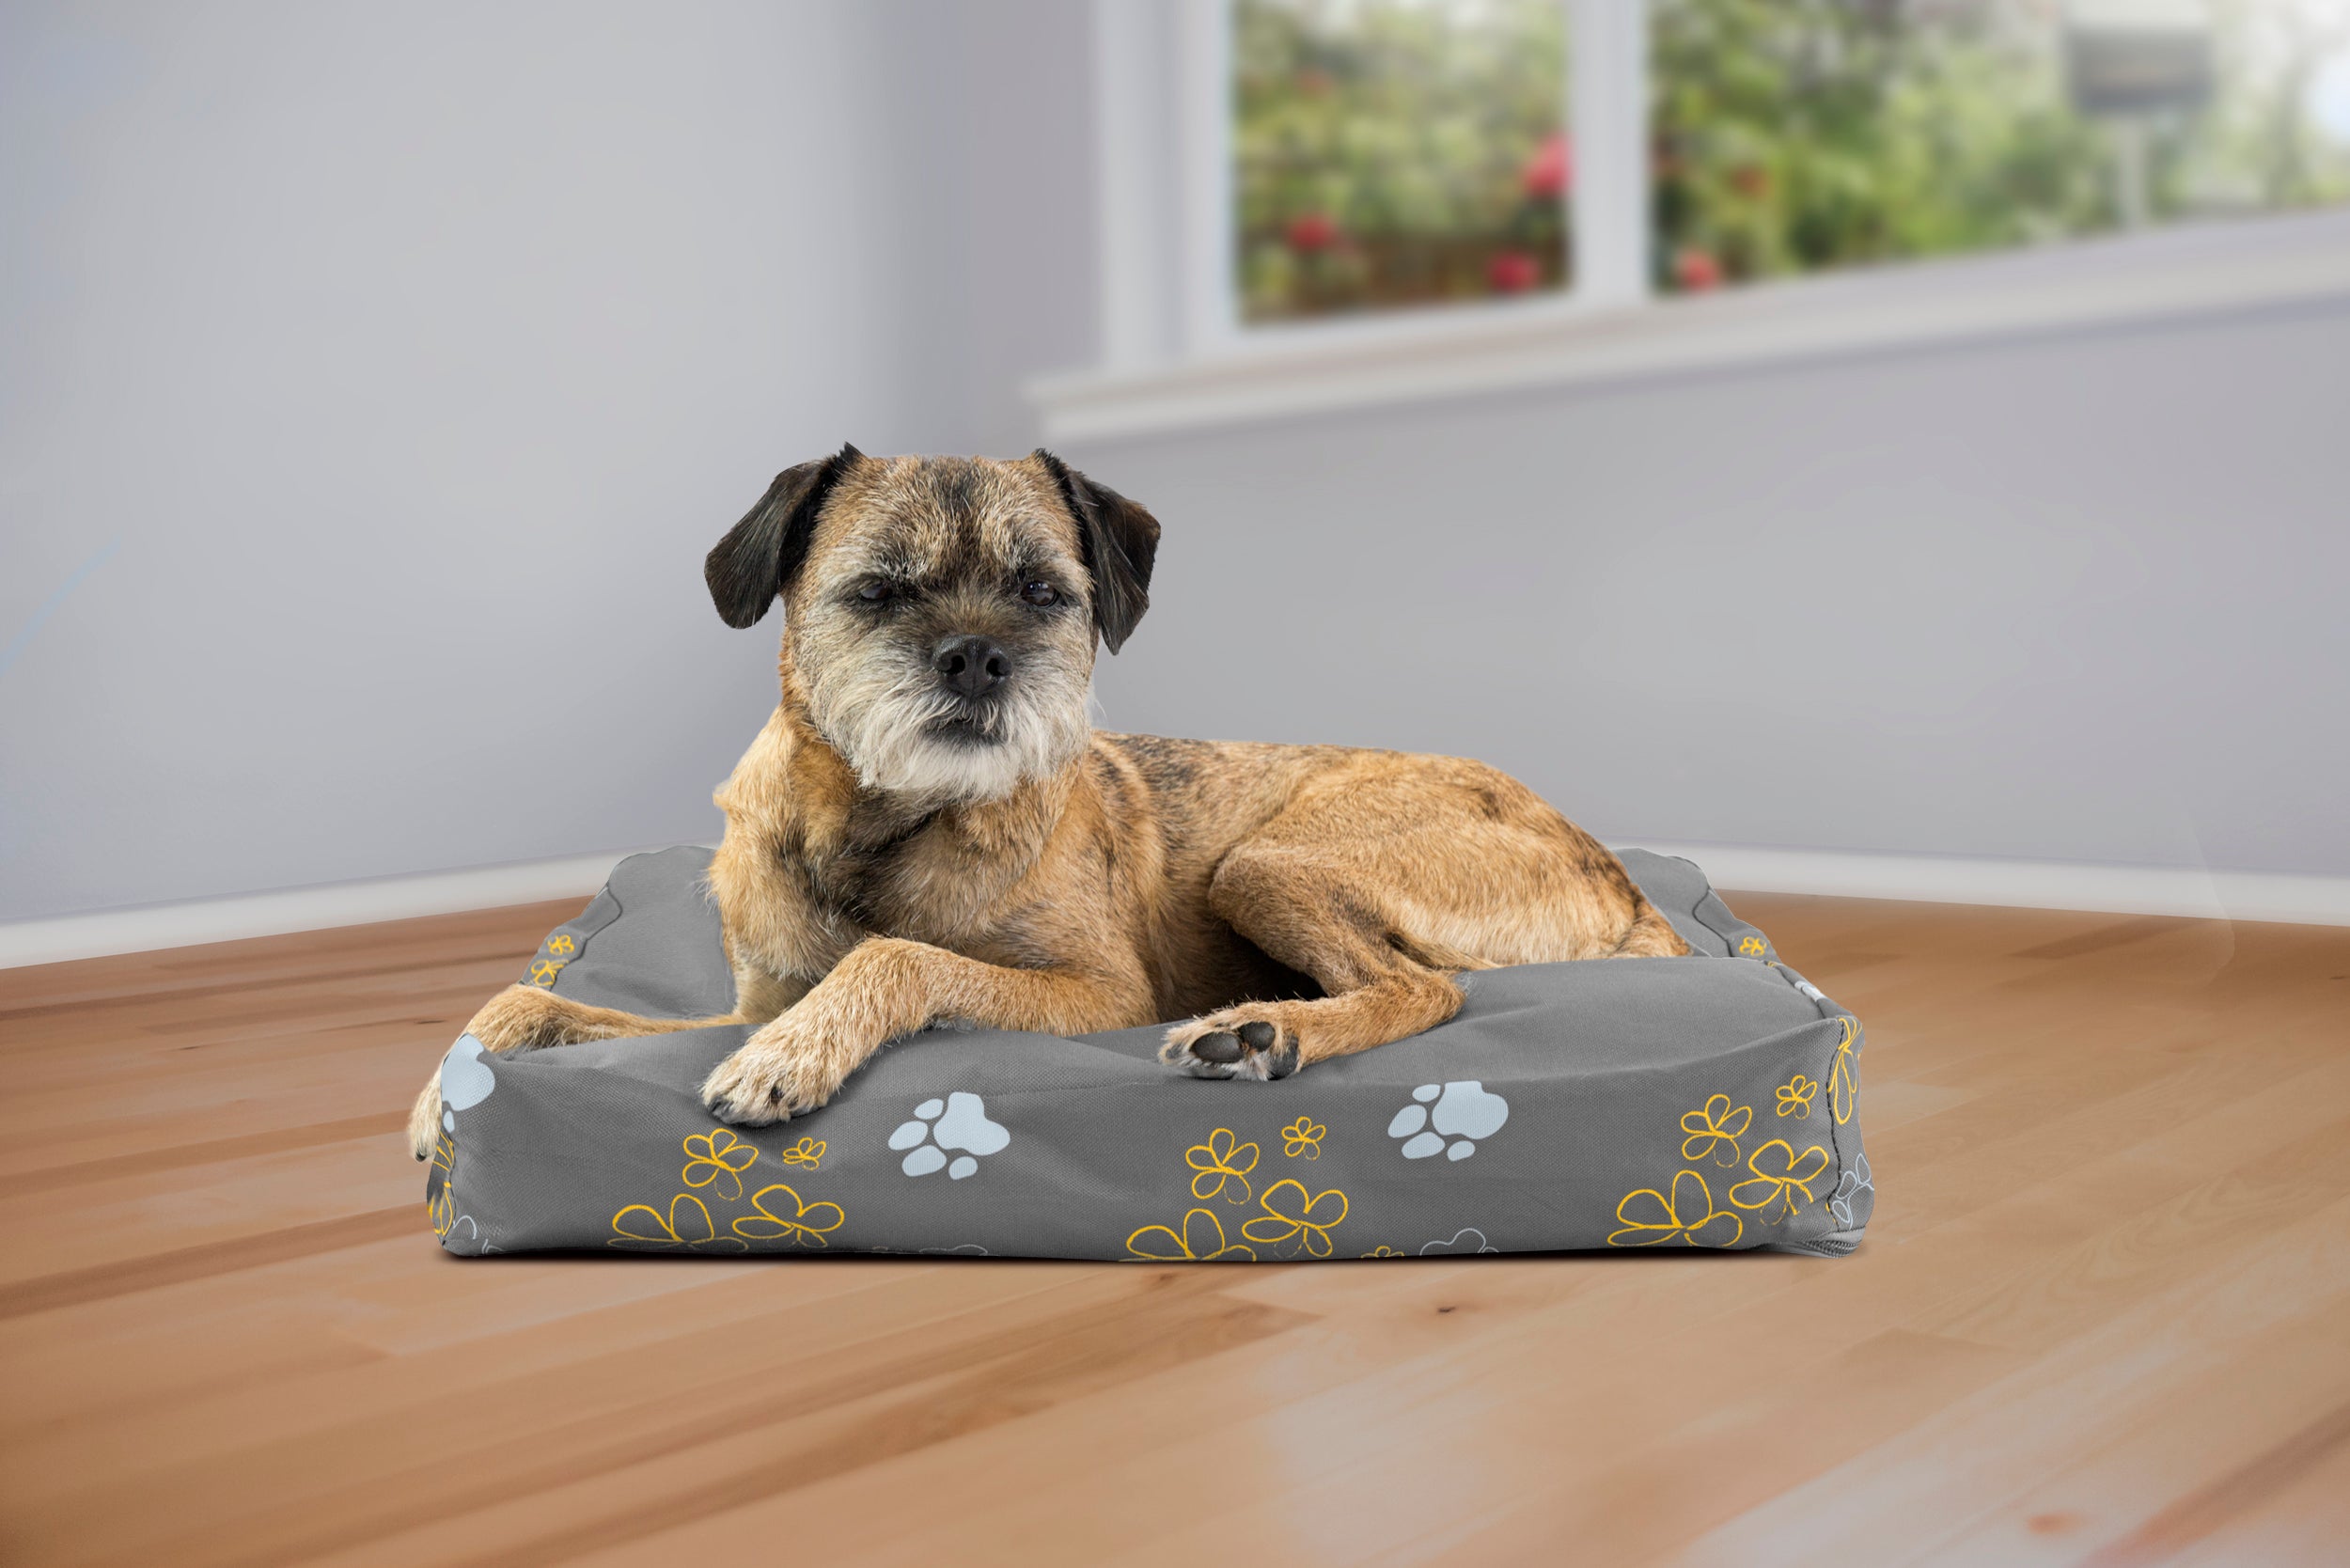 FurHaven Pet Dog Bed | Deluxe Indoor/Outdoor Garden Pillow Pet Bed for Dogs and Cats， Iron Gate， Small